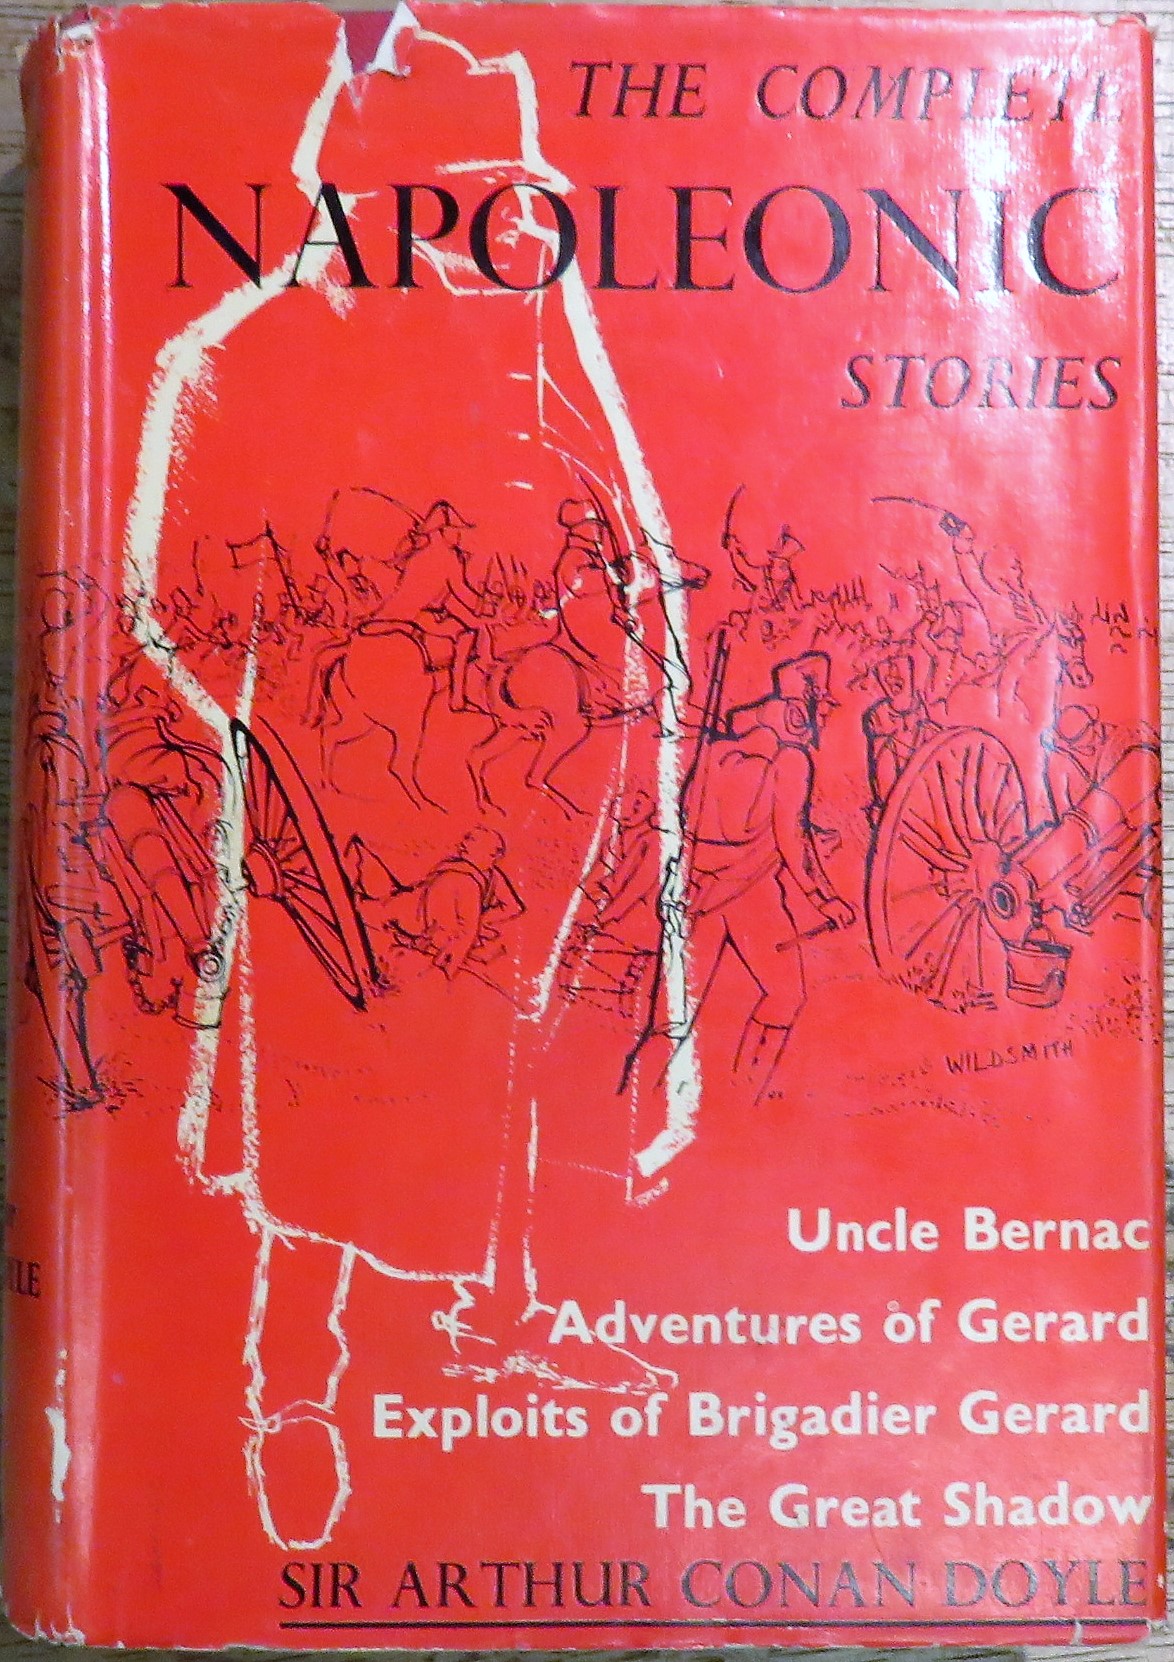 The Complete Napoleonic Stories: Uncle Bernac, Exploits of Brigadier Gerard, Adventures of Gerard, The Great Shadow